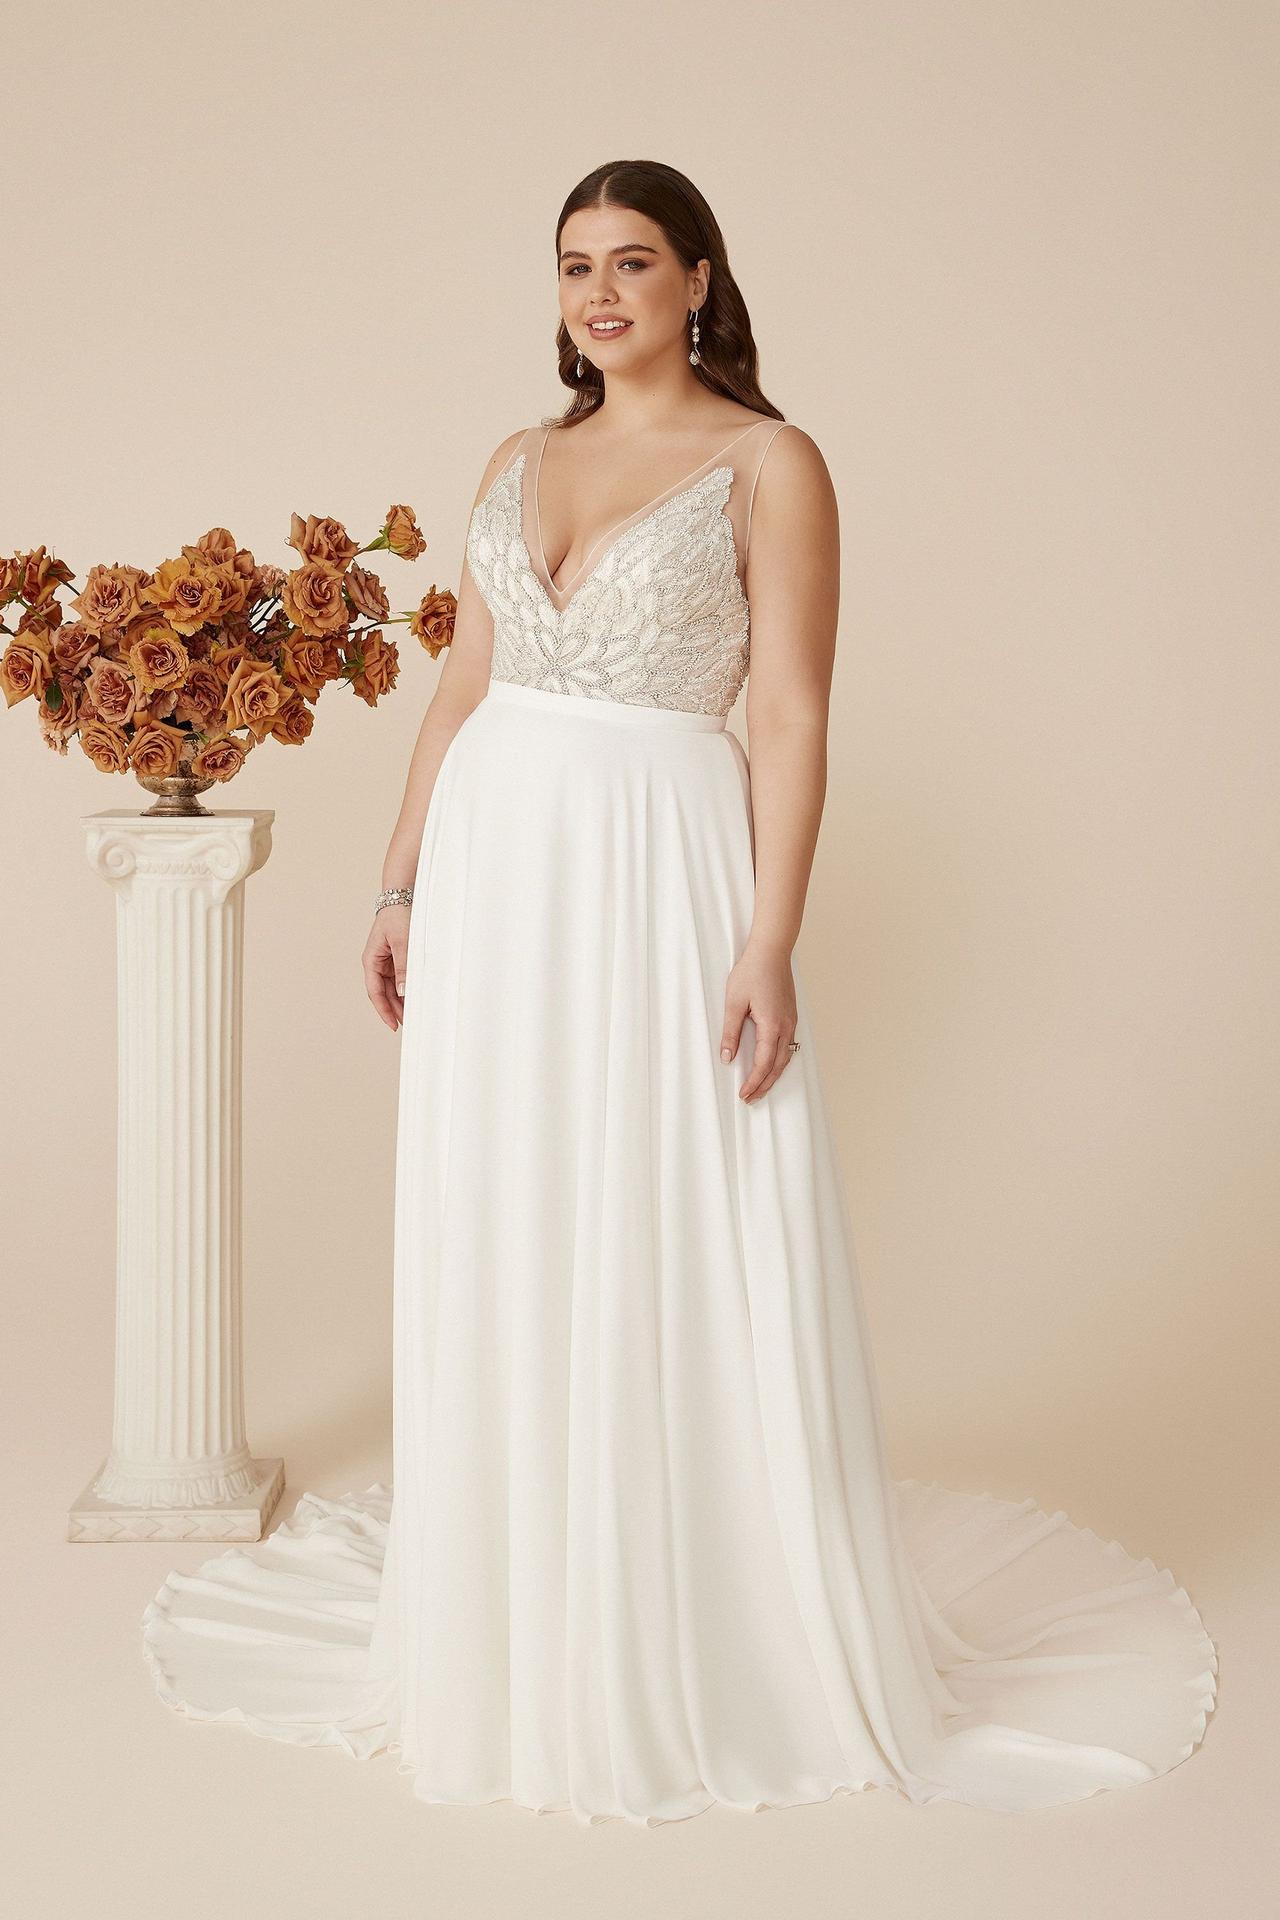 My Wedding Dress: Halter Wedding Dresses for Large Chest and Broad